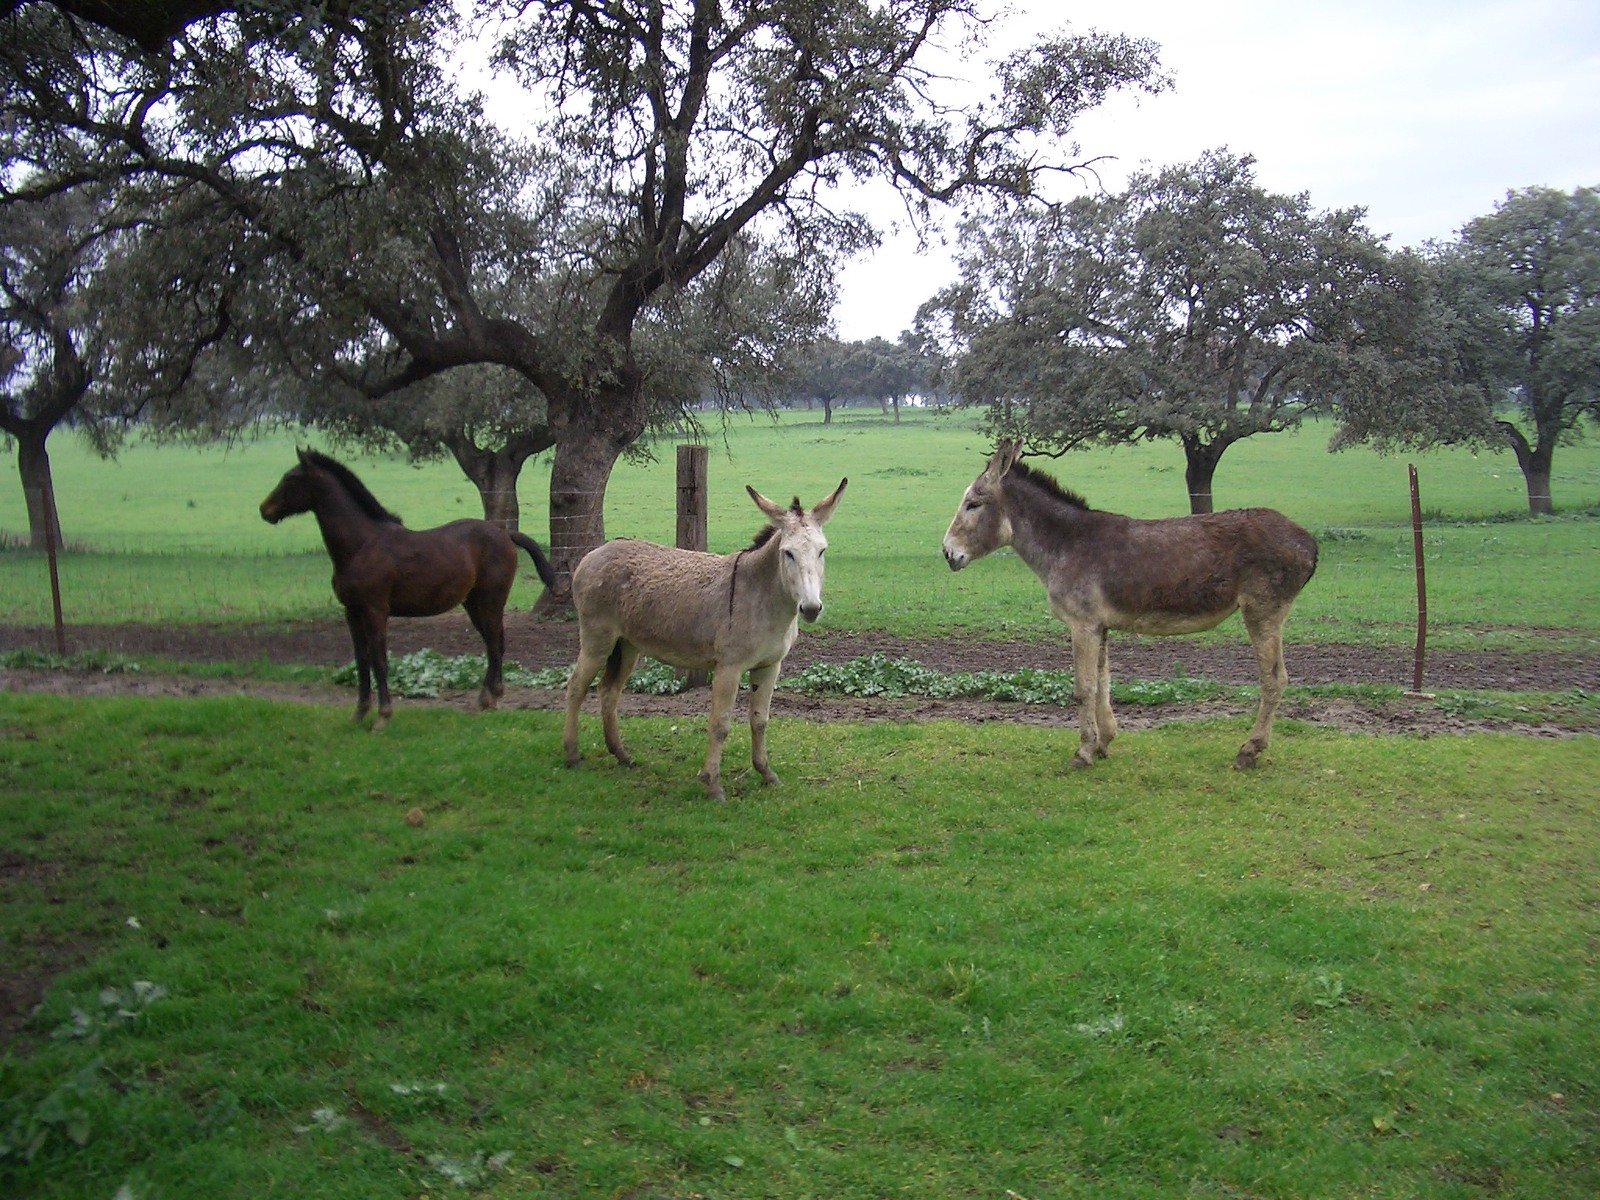 the donkeys are walking around their pen and grazing